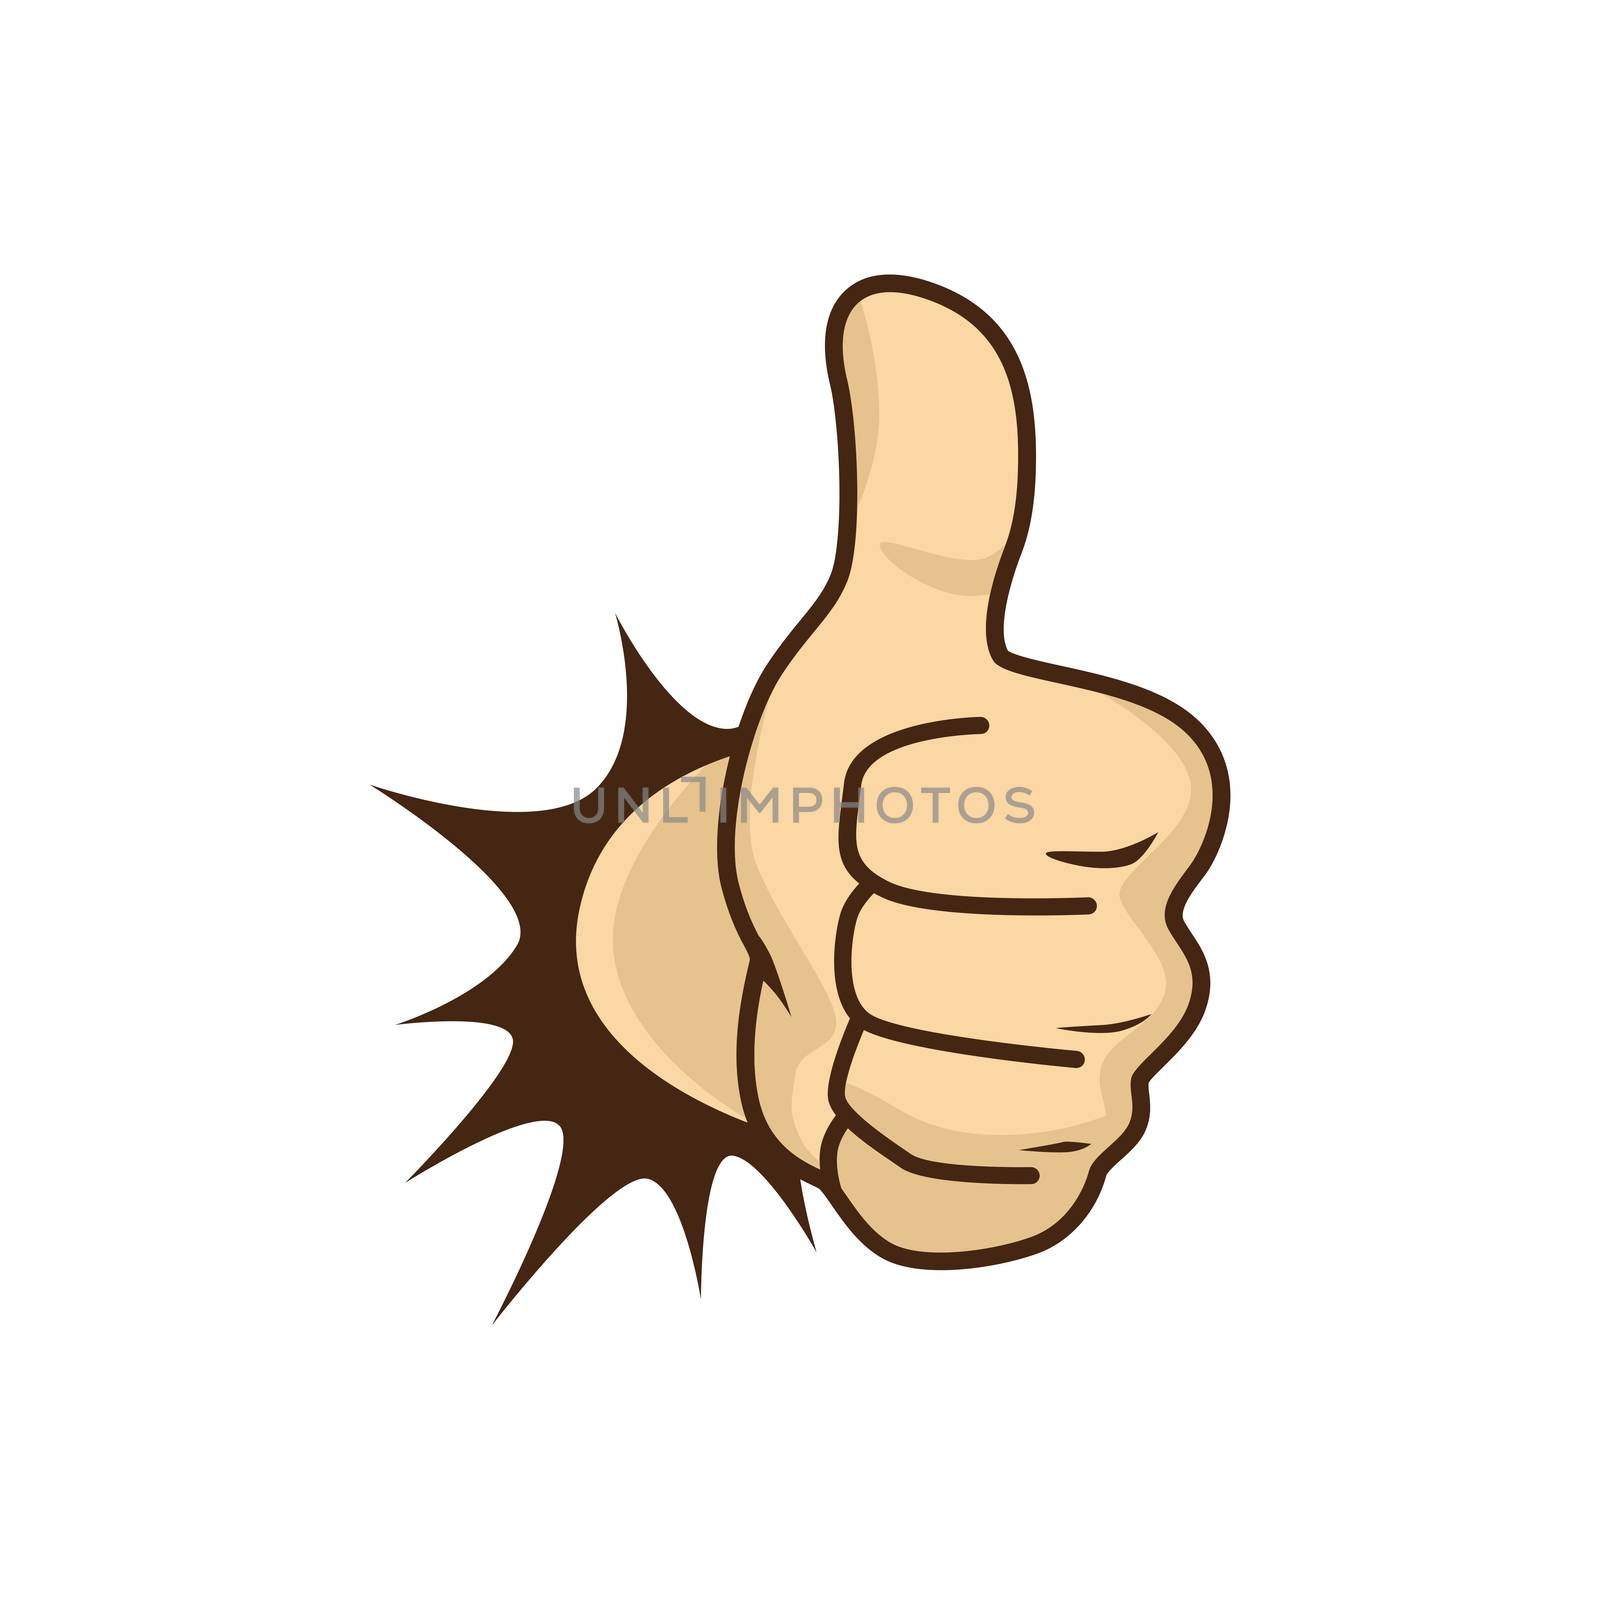 thumbs up hand character theme vector illustration